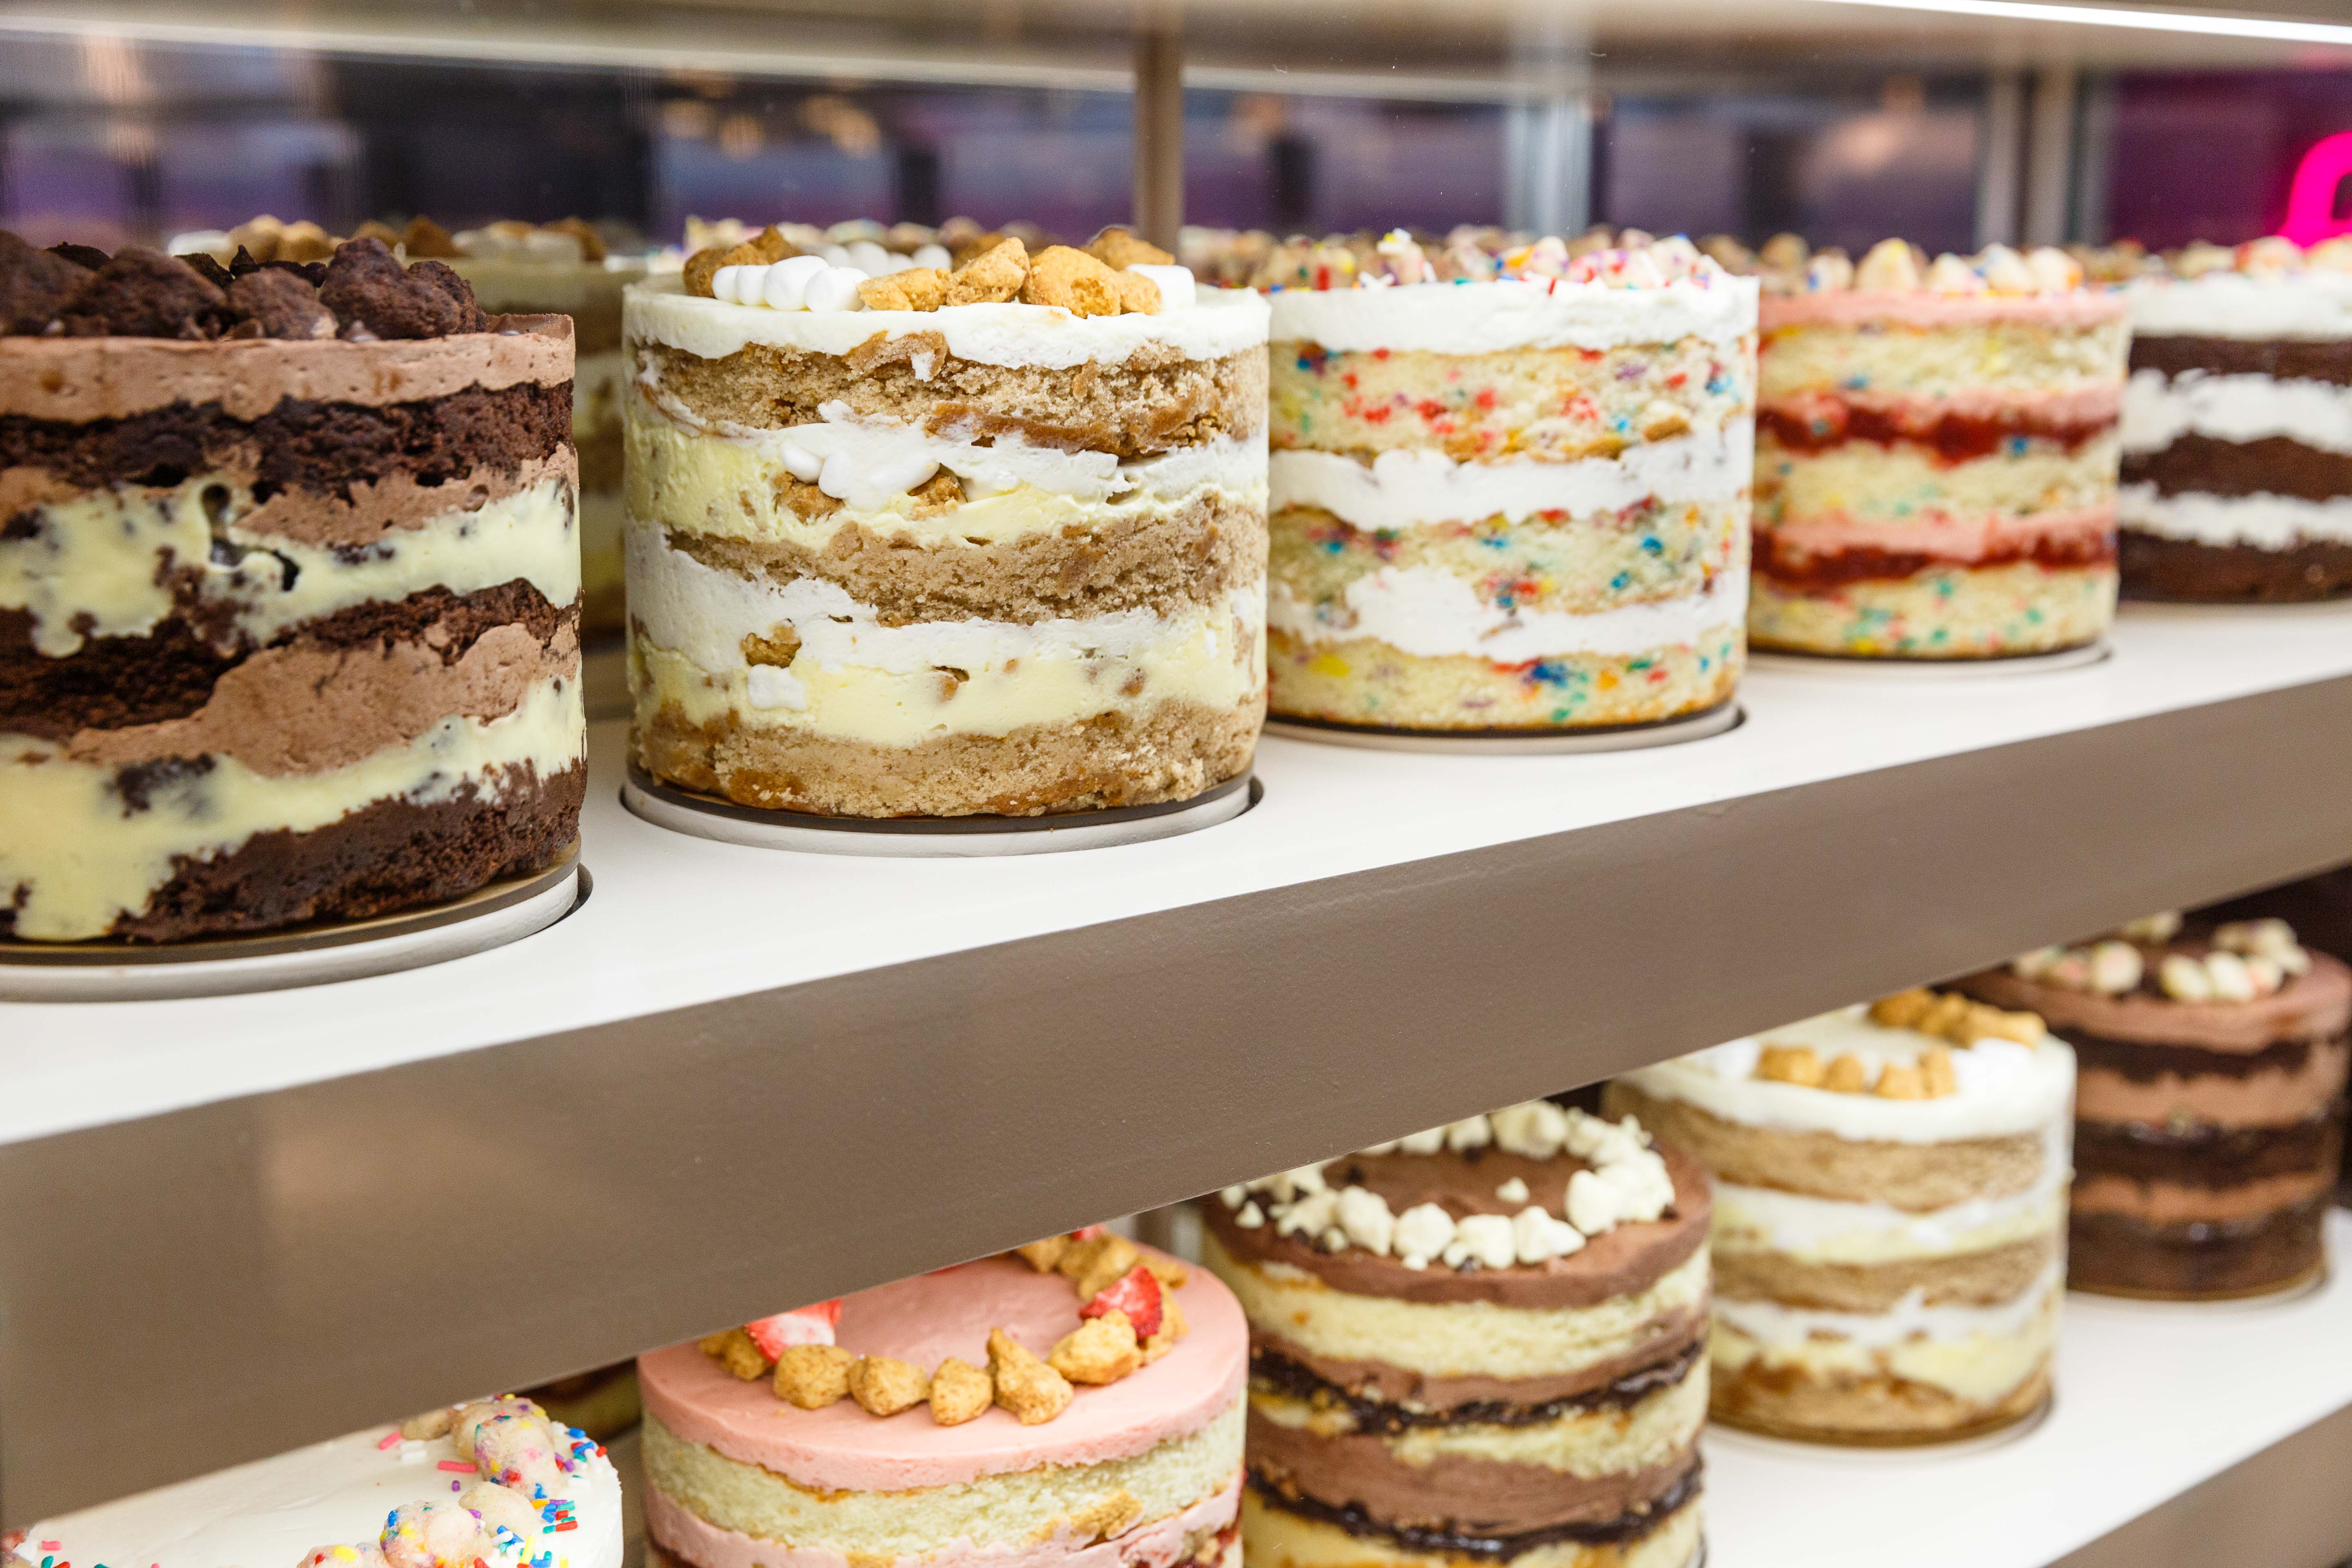 Two shelves are lined with exposed cakes from Milk Bar.